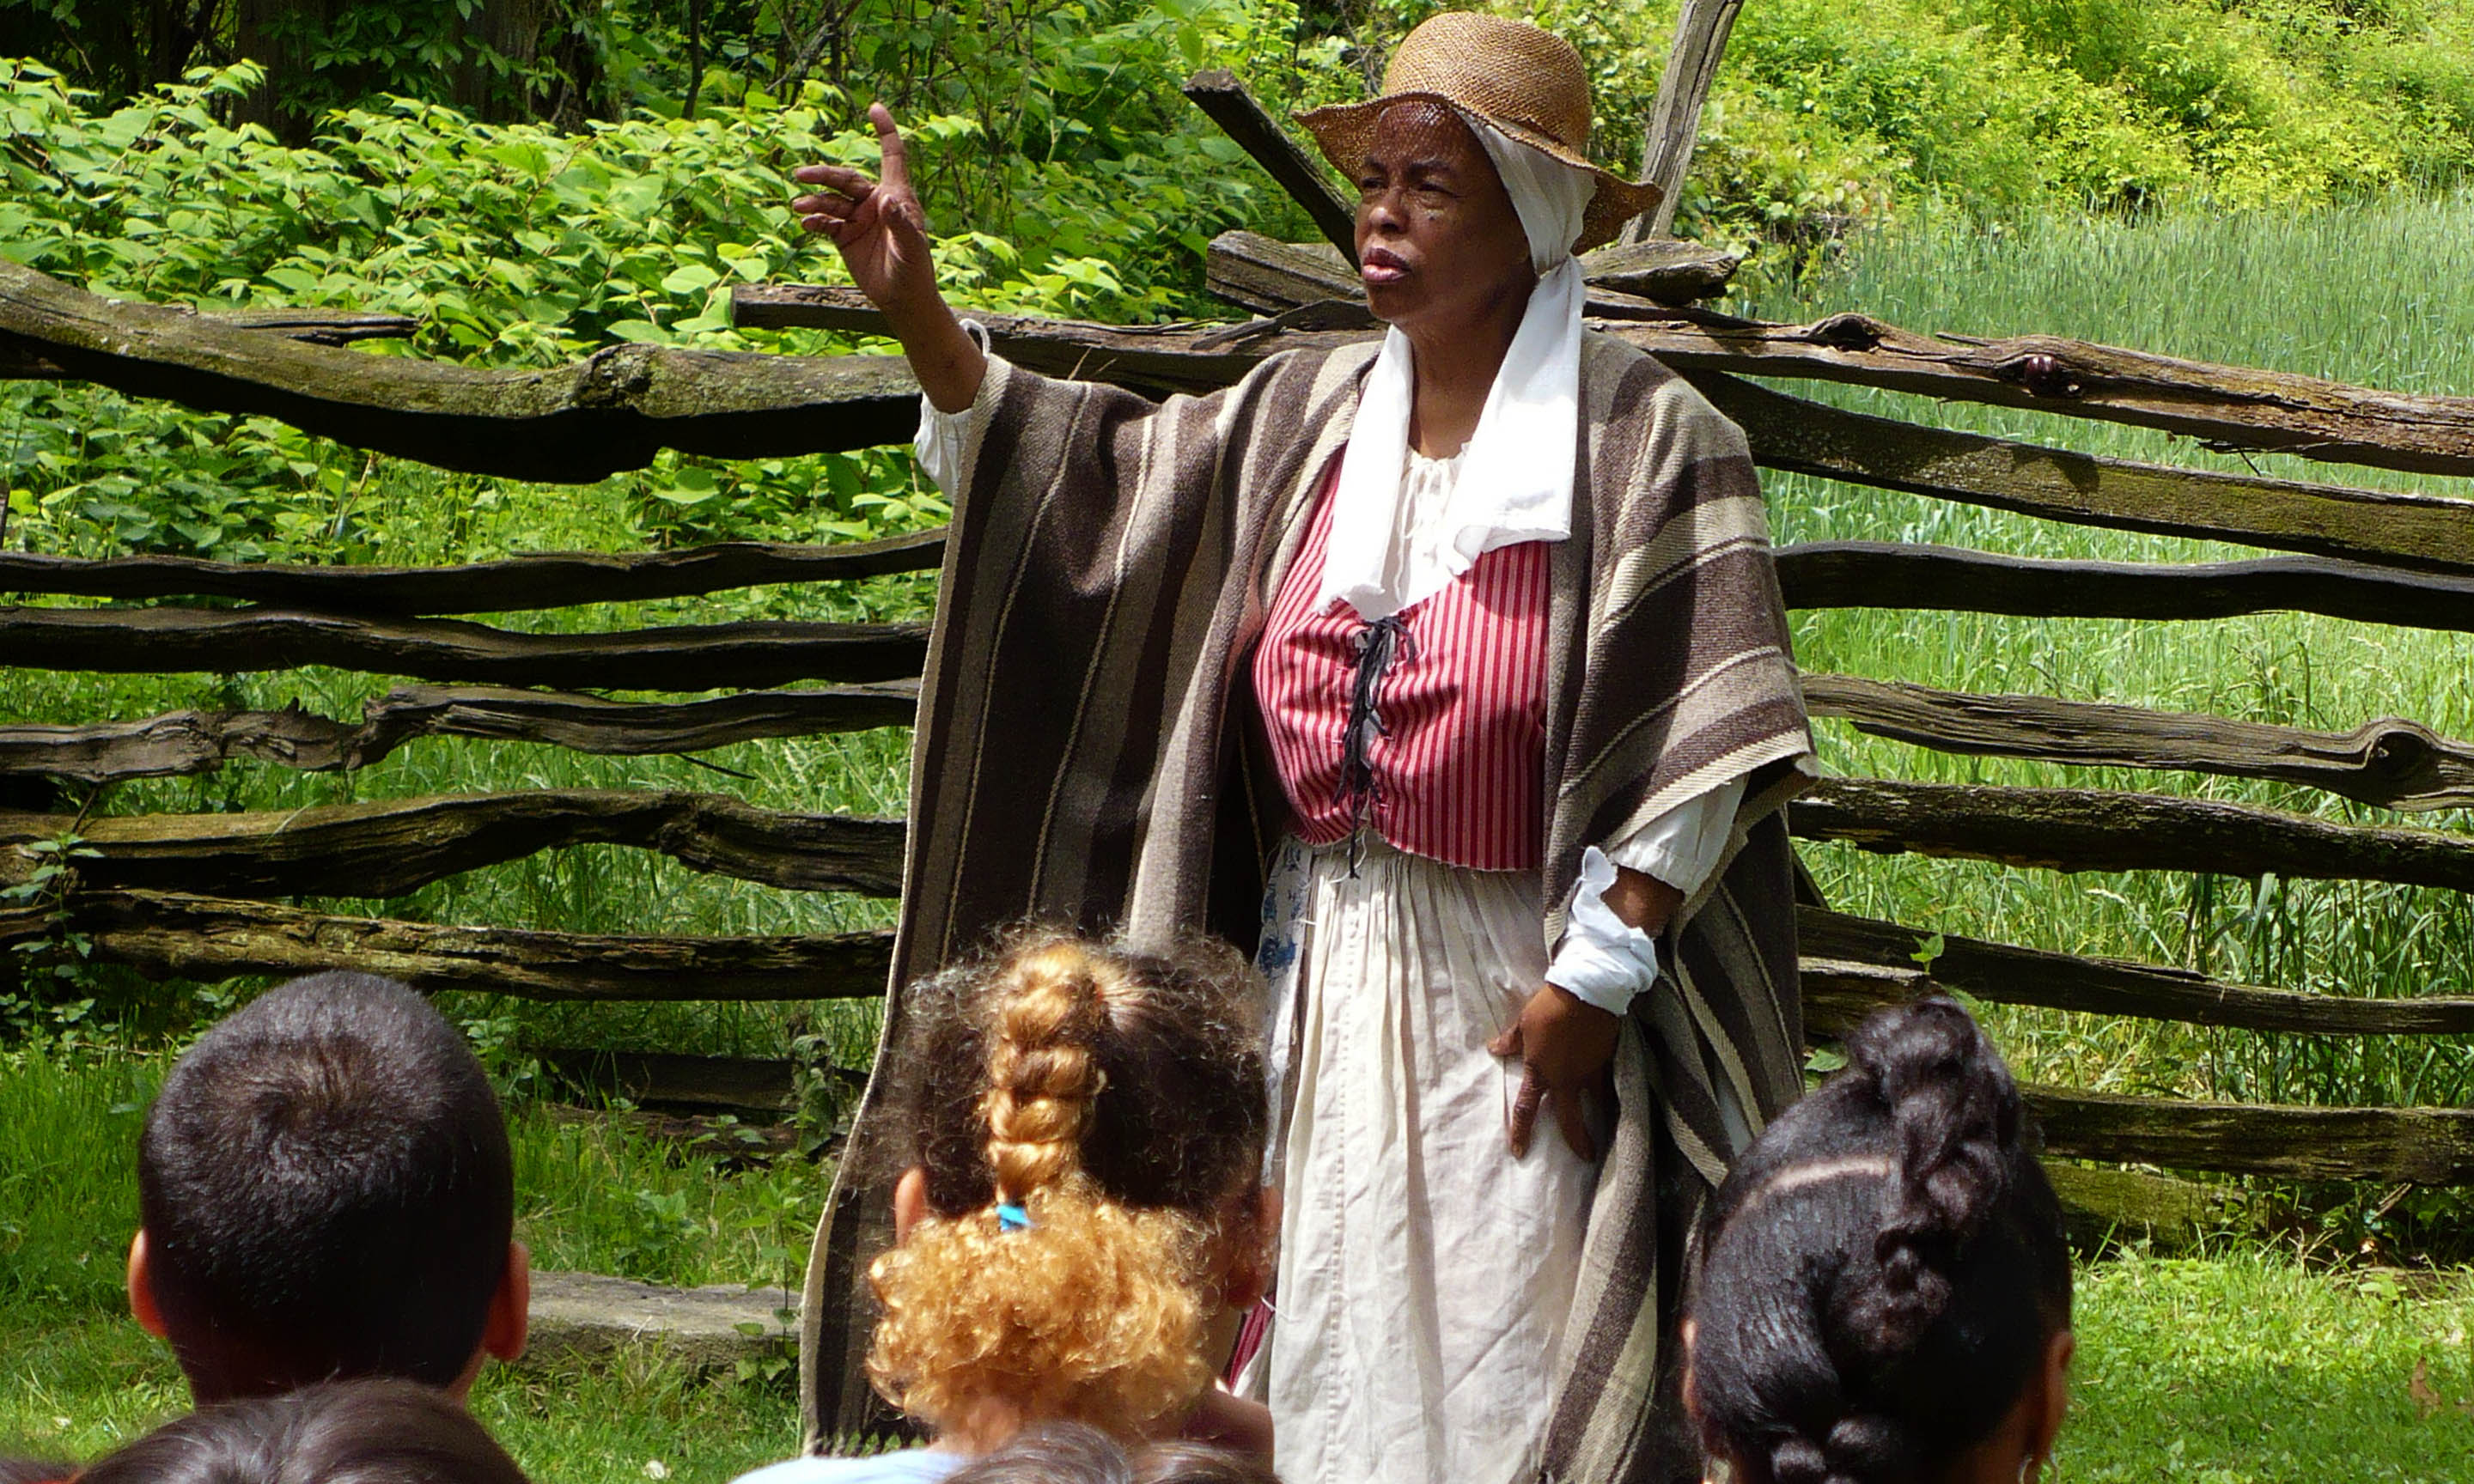 Students engage with a storytelling performance at Philipsburg Manor